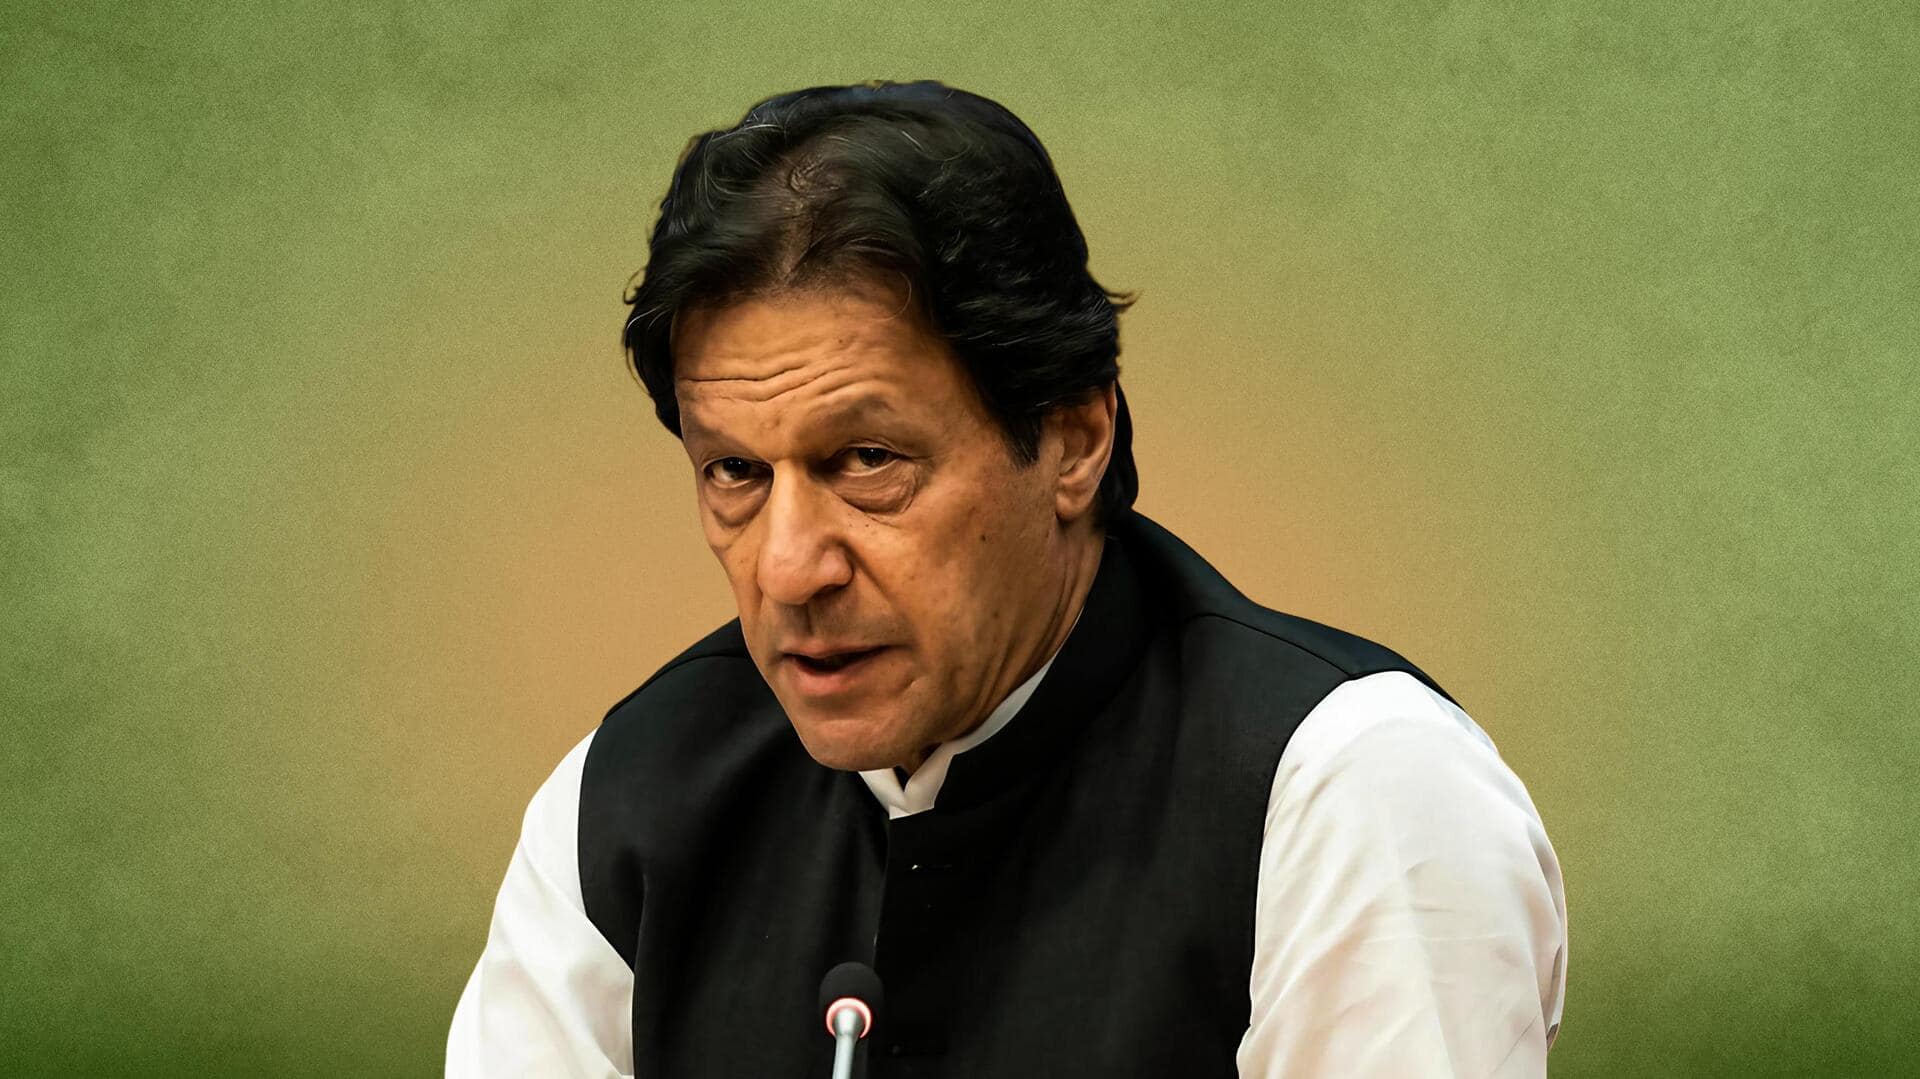 Pakistan: Ex-PM Imran Khan indicted for leaking classified documents